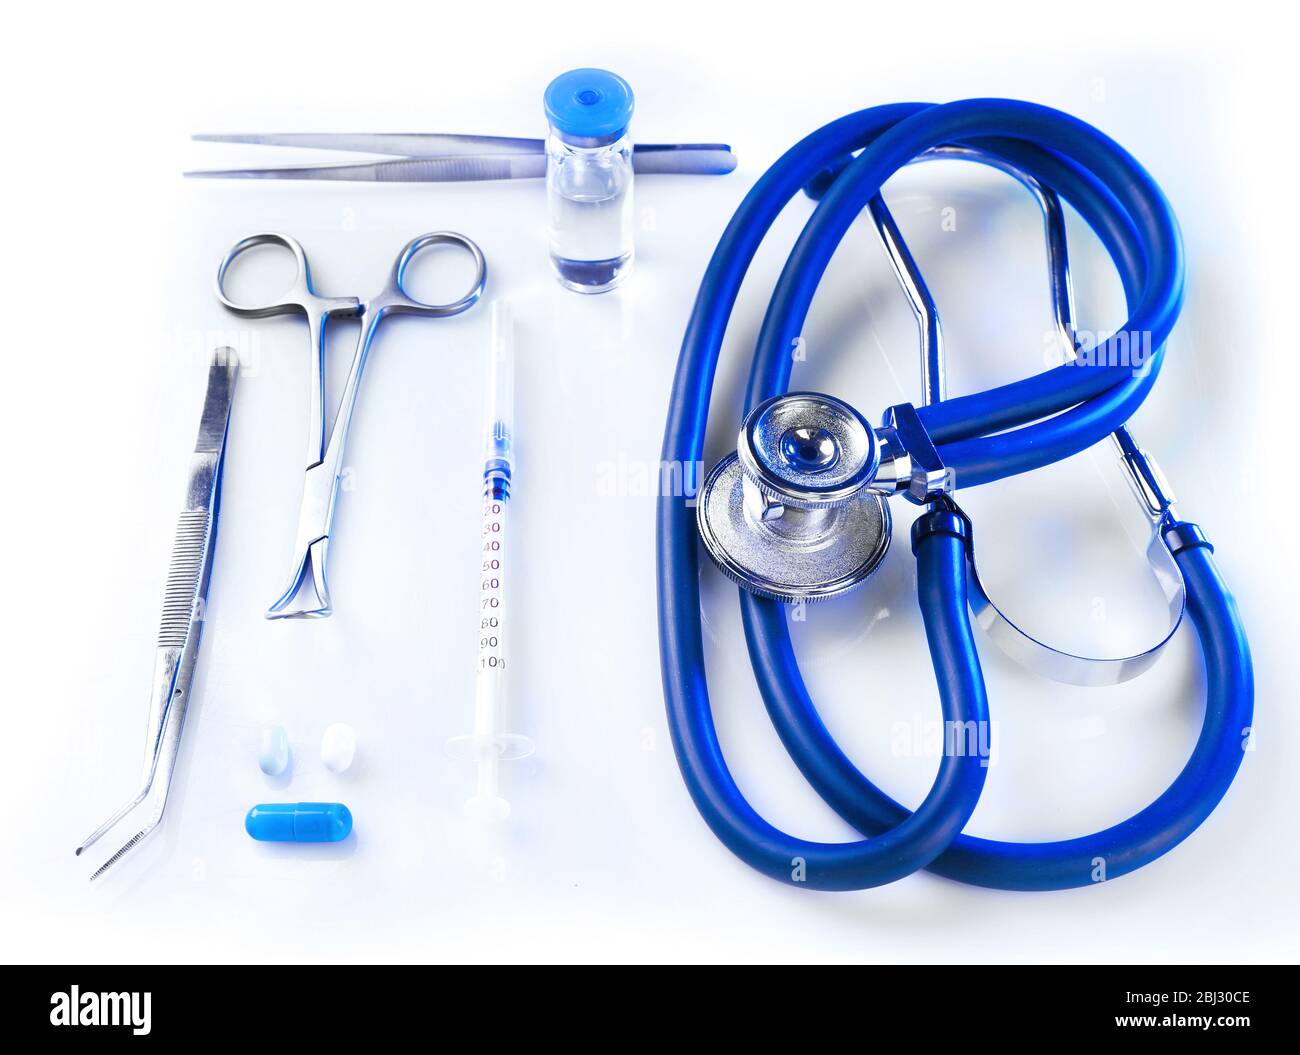 https://c8.alamy.com/comp/2BJ30CE/stethoscope-with-medical-equipment-on-white-background-close-up-2BJ30CE.jpg